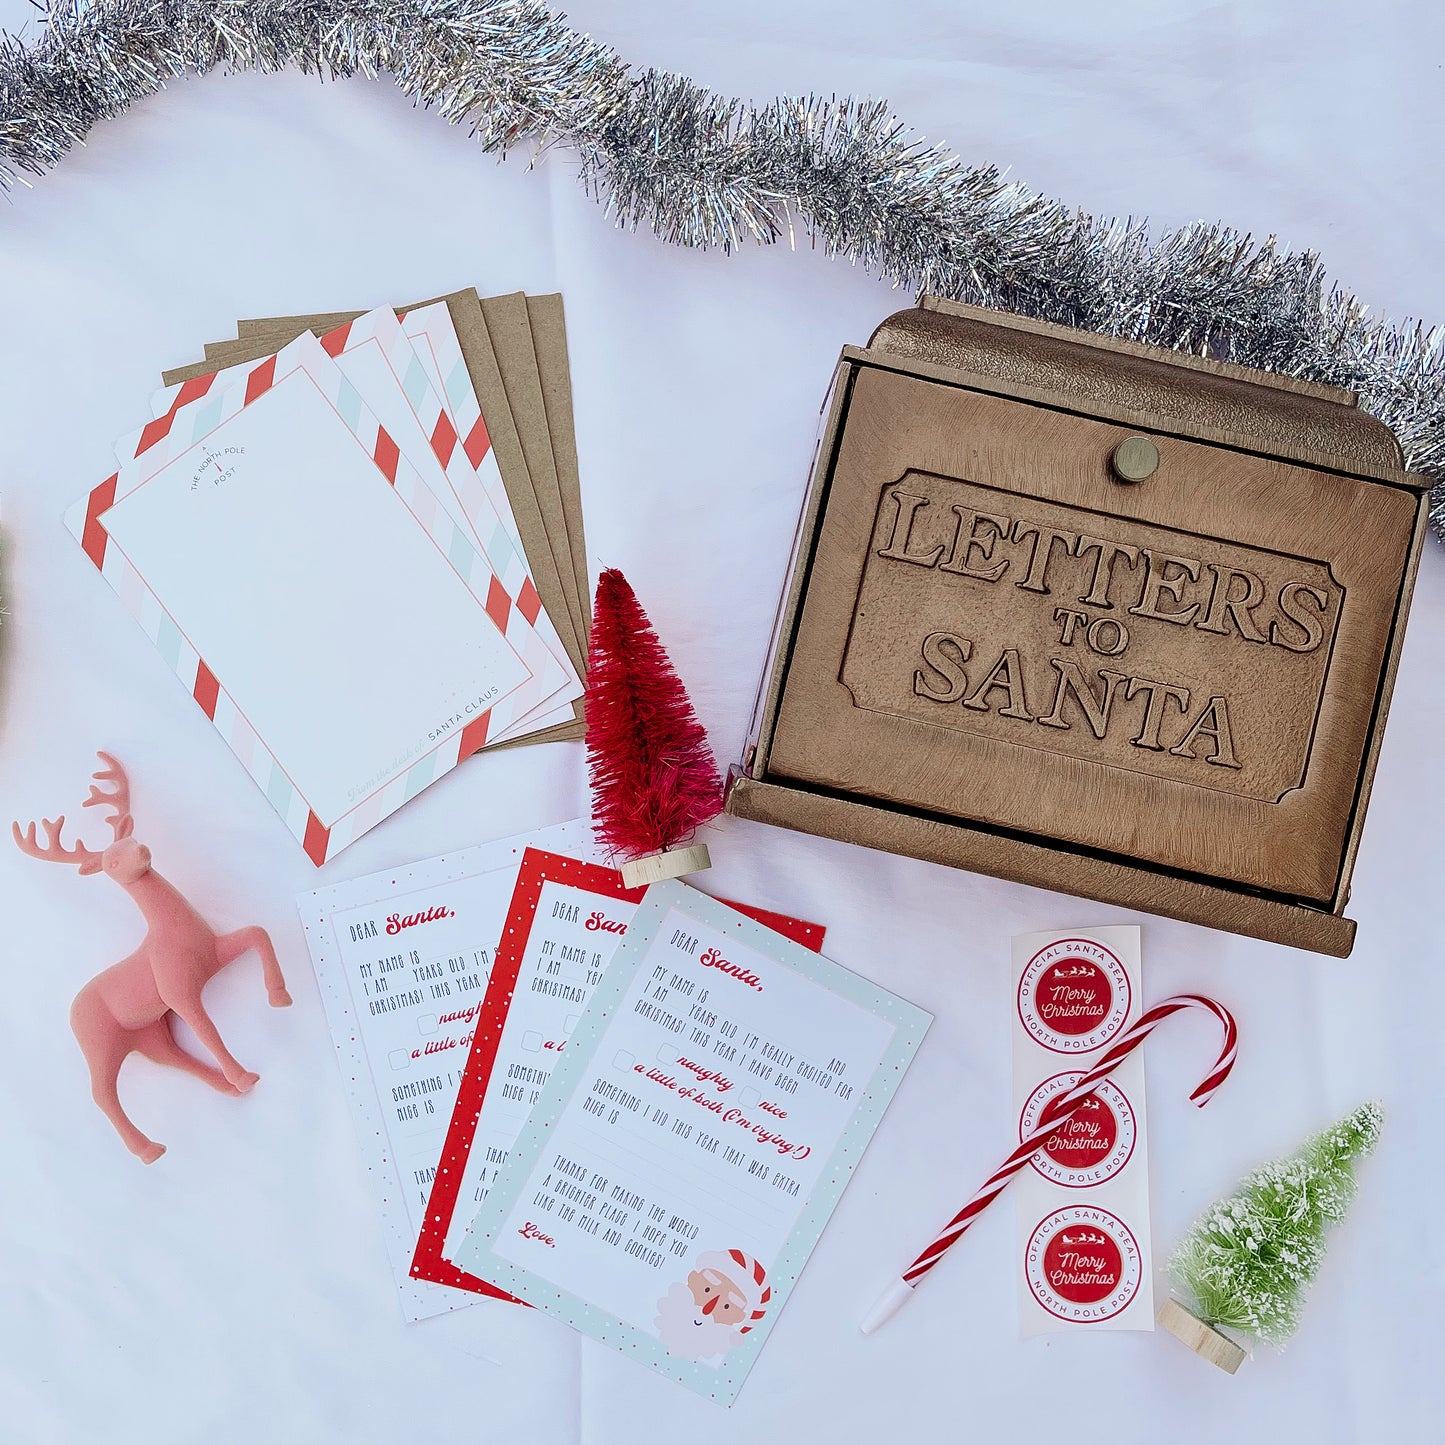 Santa North Pole letter kit that includes three letters to Santa, three blank letters from Santa, three envelopes and North Pole seals and a candy cane pen. 